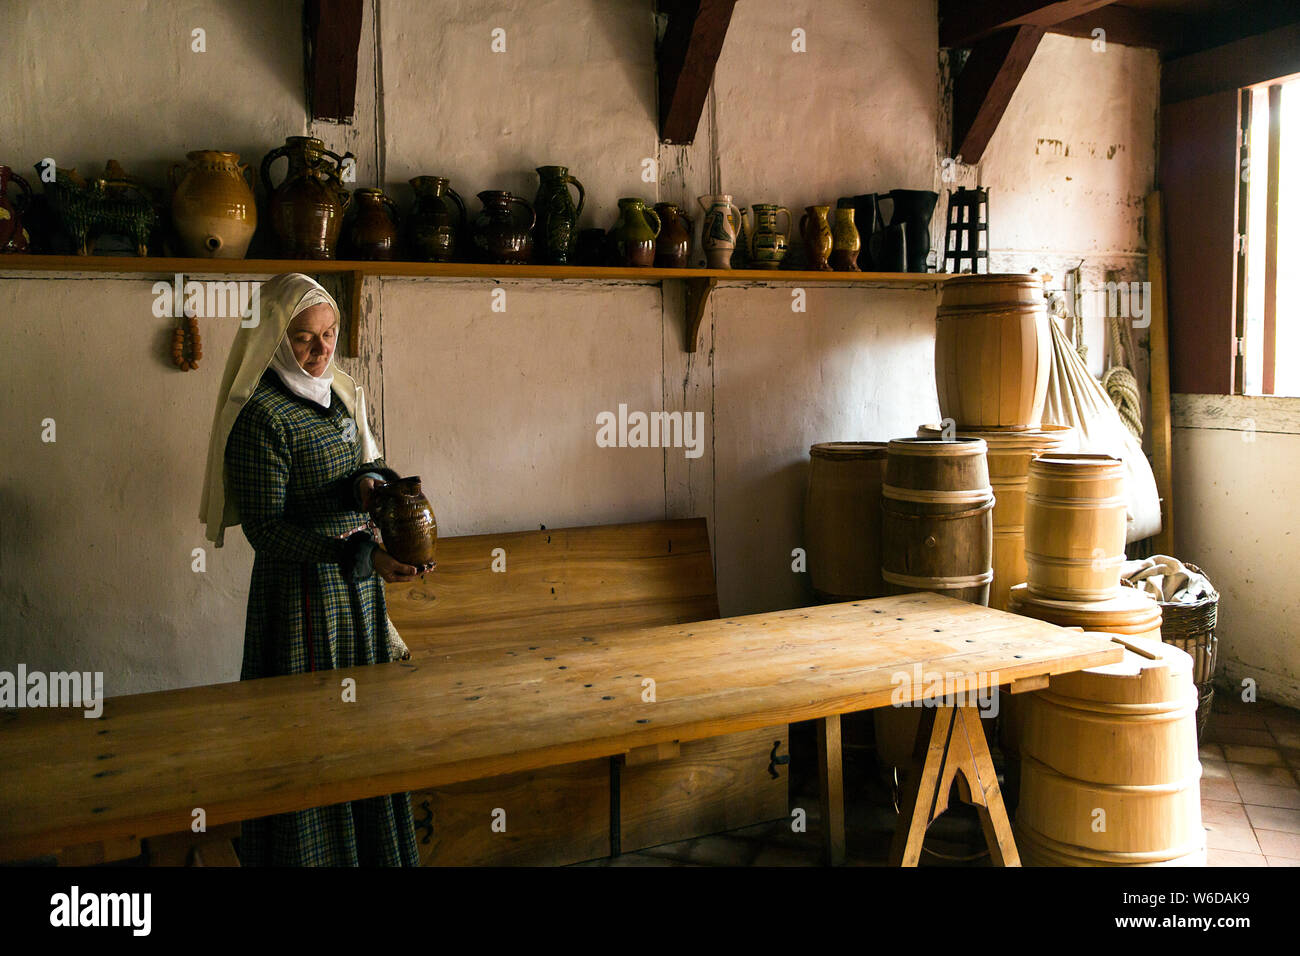 A woman in a tavern at the outdoor Medieval Centre in Nykøbing Falster, Denmark.  The Medieval Centre is built around the village Sundkøbing at a fjord as it was around the year 1400. Houses are authentically designed and built with the people who populate the village, men, women, children, peasants, craftsmen, warriors and knights etc dressing and work as they would back in 1400.  Canons and large trebuchets can be seen firing missiles, knights in armour on horseback competing with lances and swords, dyers colouring textiles with plants and in the convent garden nuns grow medicinal herbs. Stock Photo